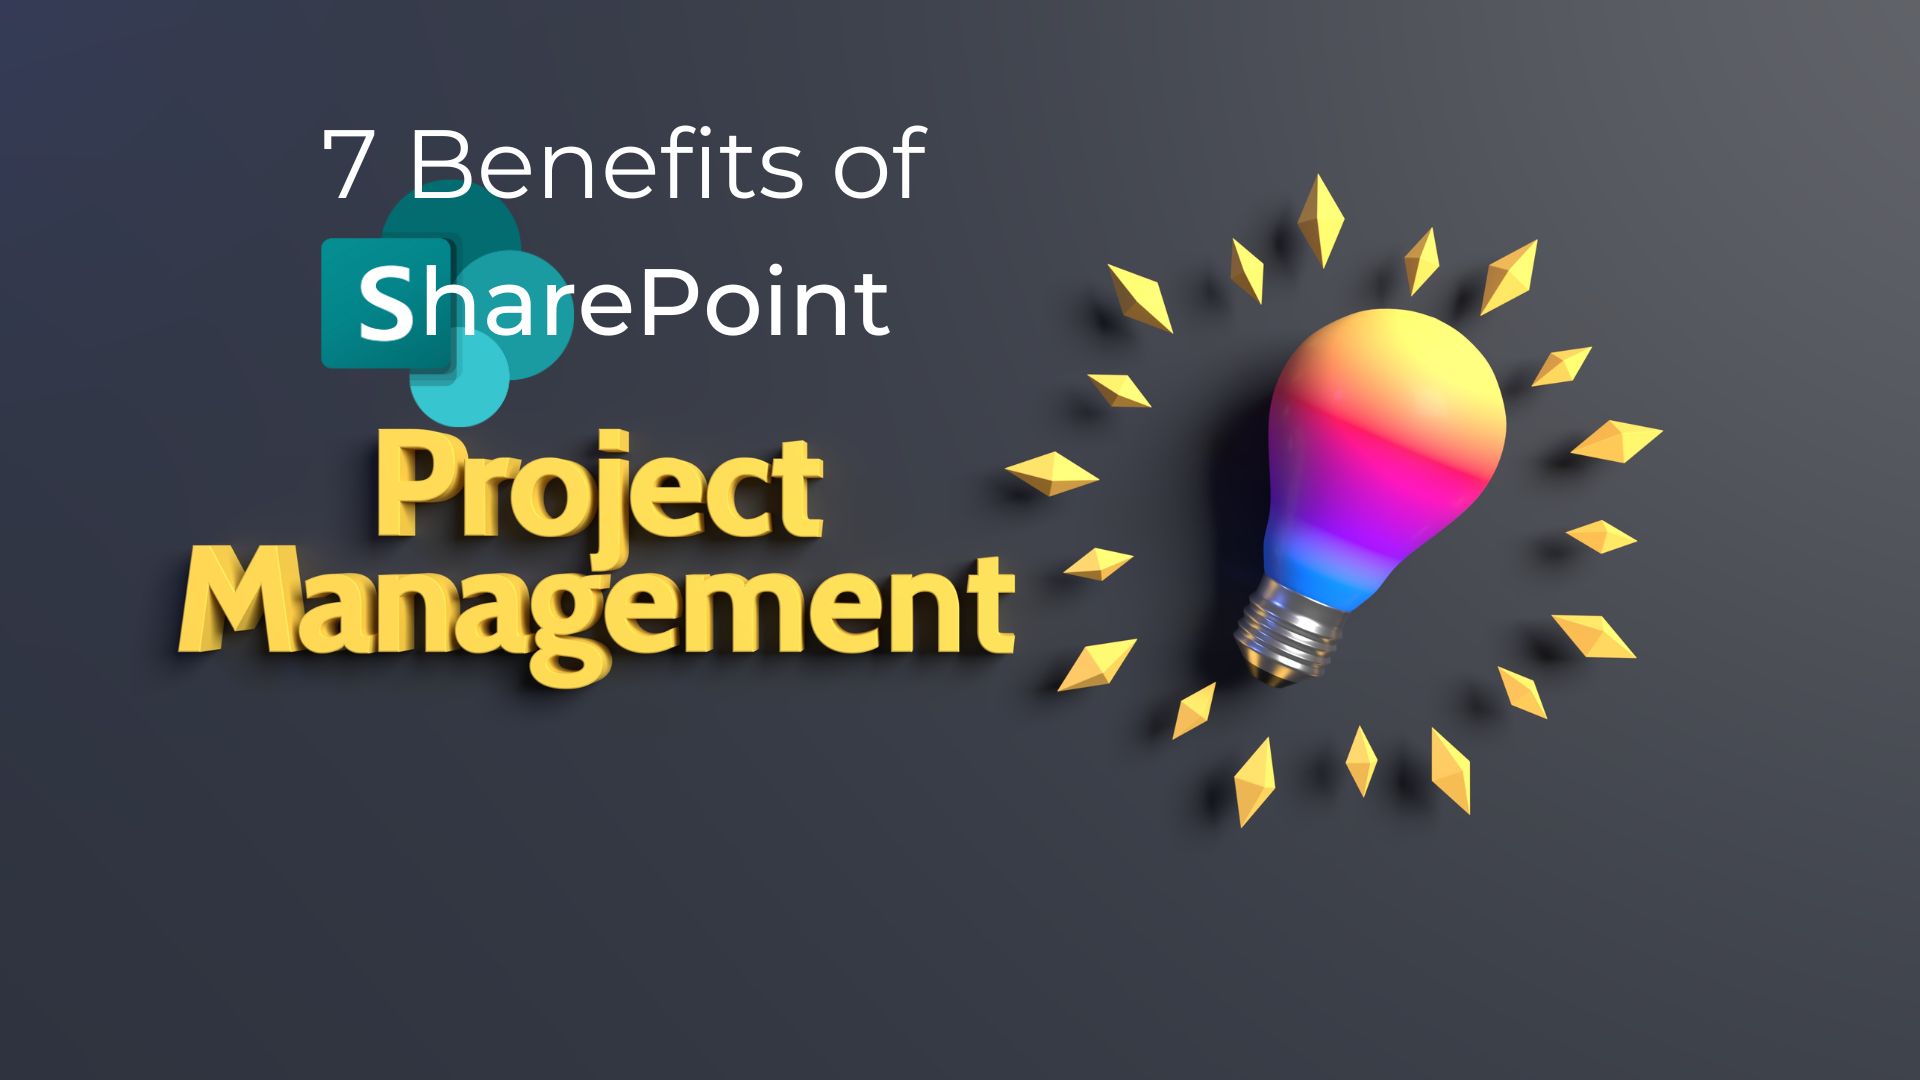 7 benefits of SharePoint project management on a black board with a rainbow lightbulb to the right.